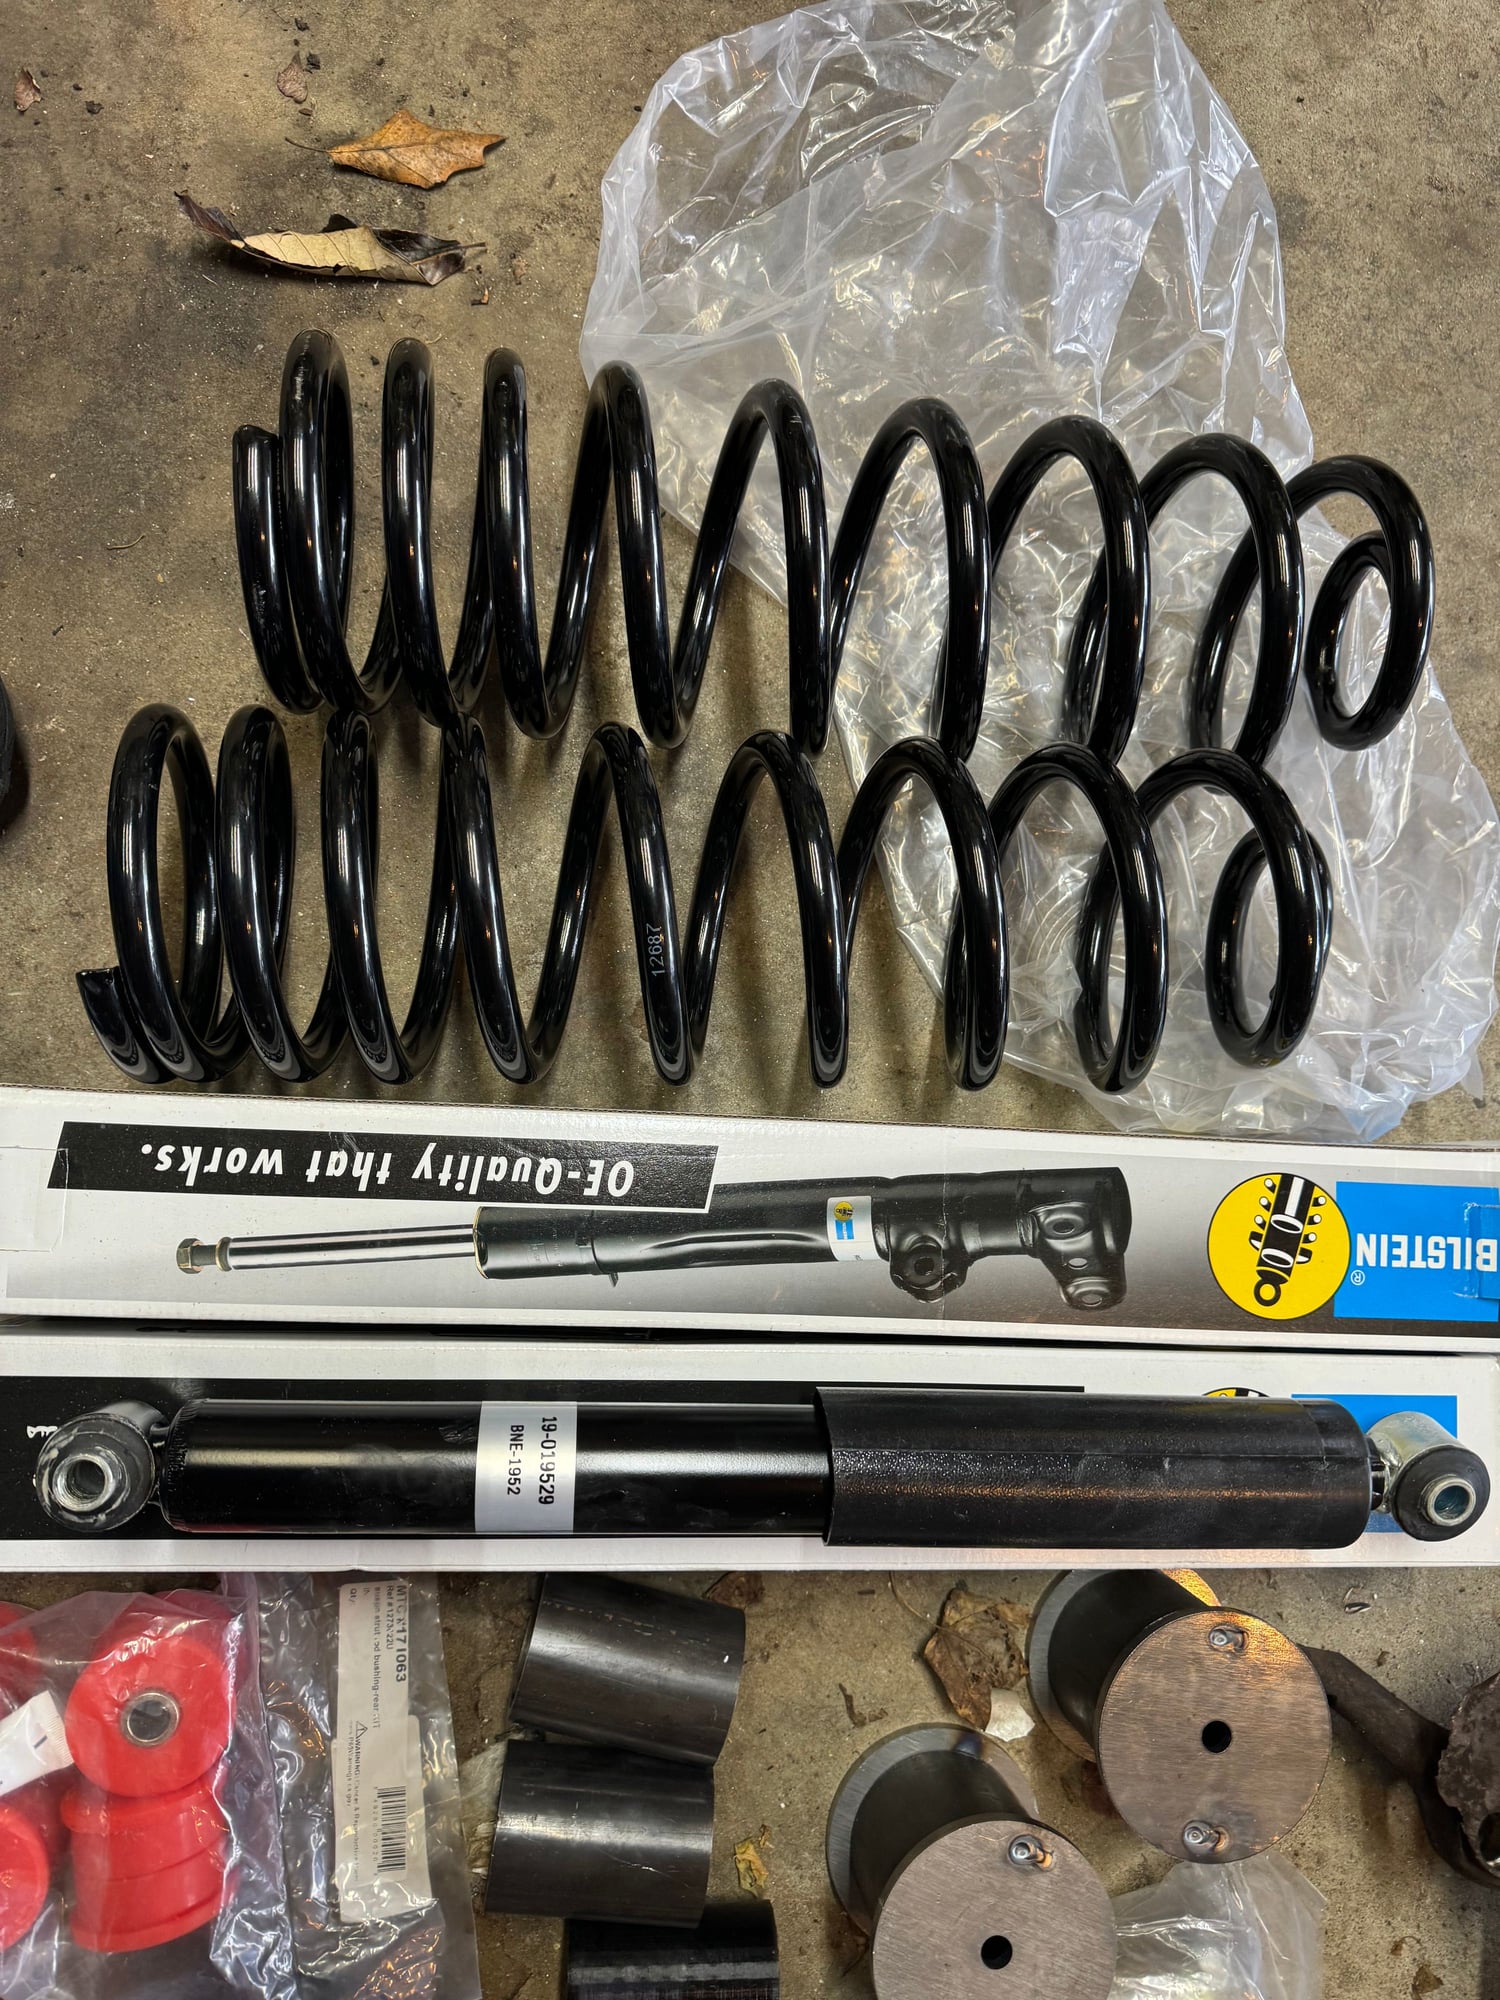 Steering/Suspension - Volvo 240 Lucas Lift Kit with PanHard Bar Bushings Rear Springs and Struts - New - All Years Volvo 240 - Trumbull, CT 06611, United States